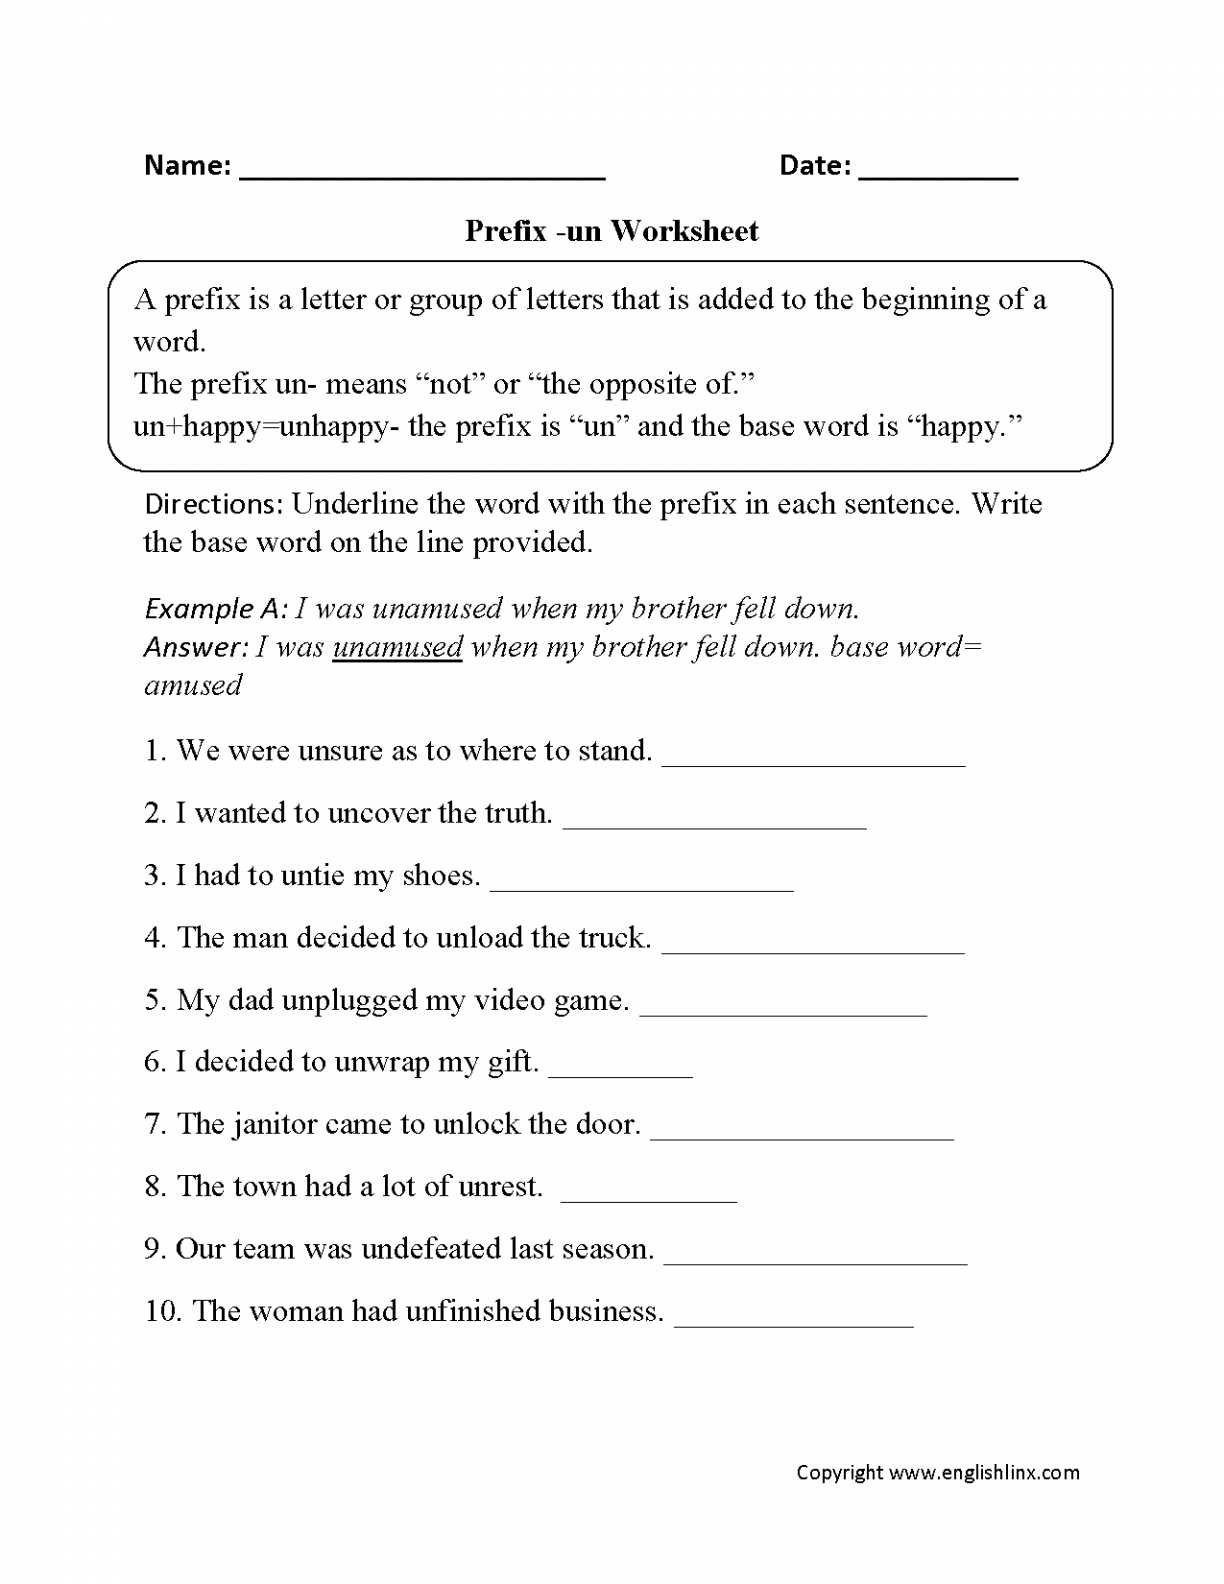 Paragraph Writing Worksheets as Well as Context Clues In Paragraphs Worksheets Worksheet for Kids